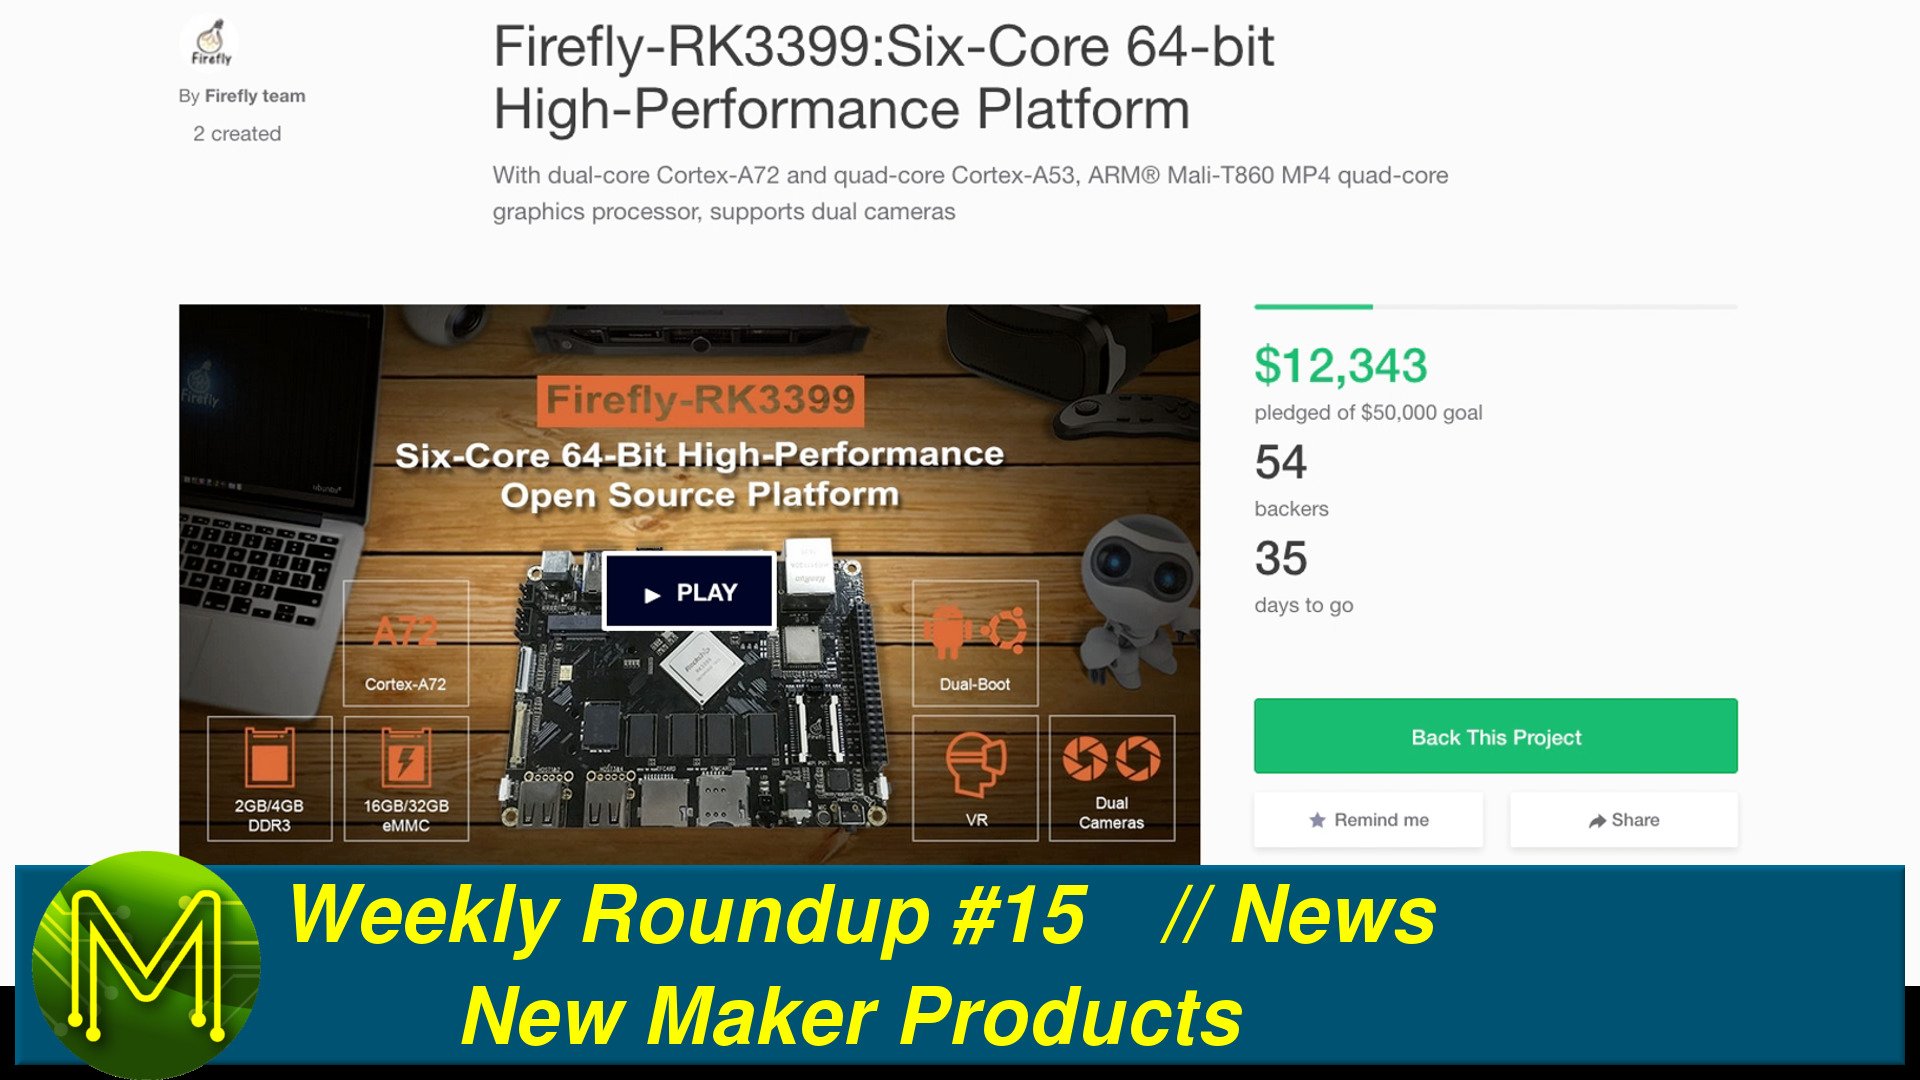 Weekly Roundup #15 - New Maker Products // News